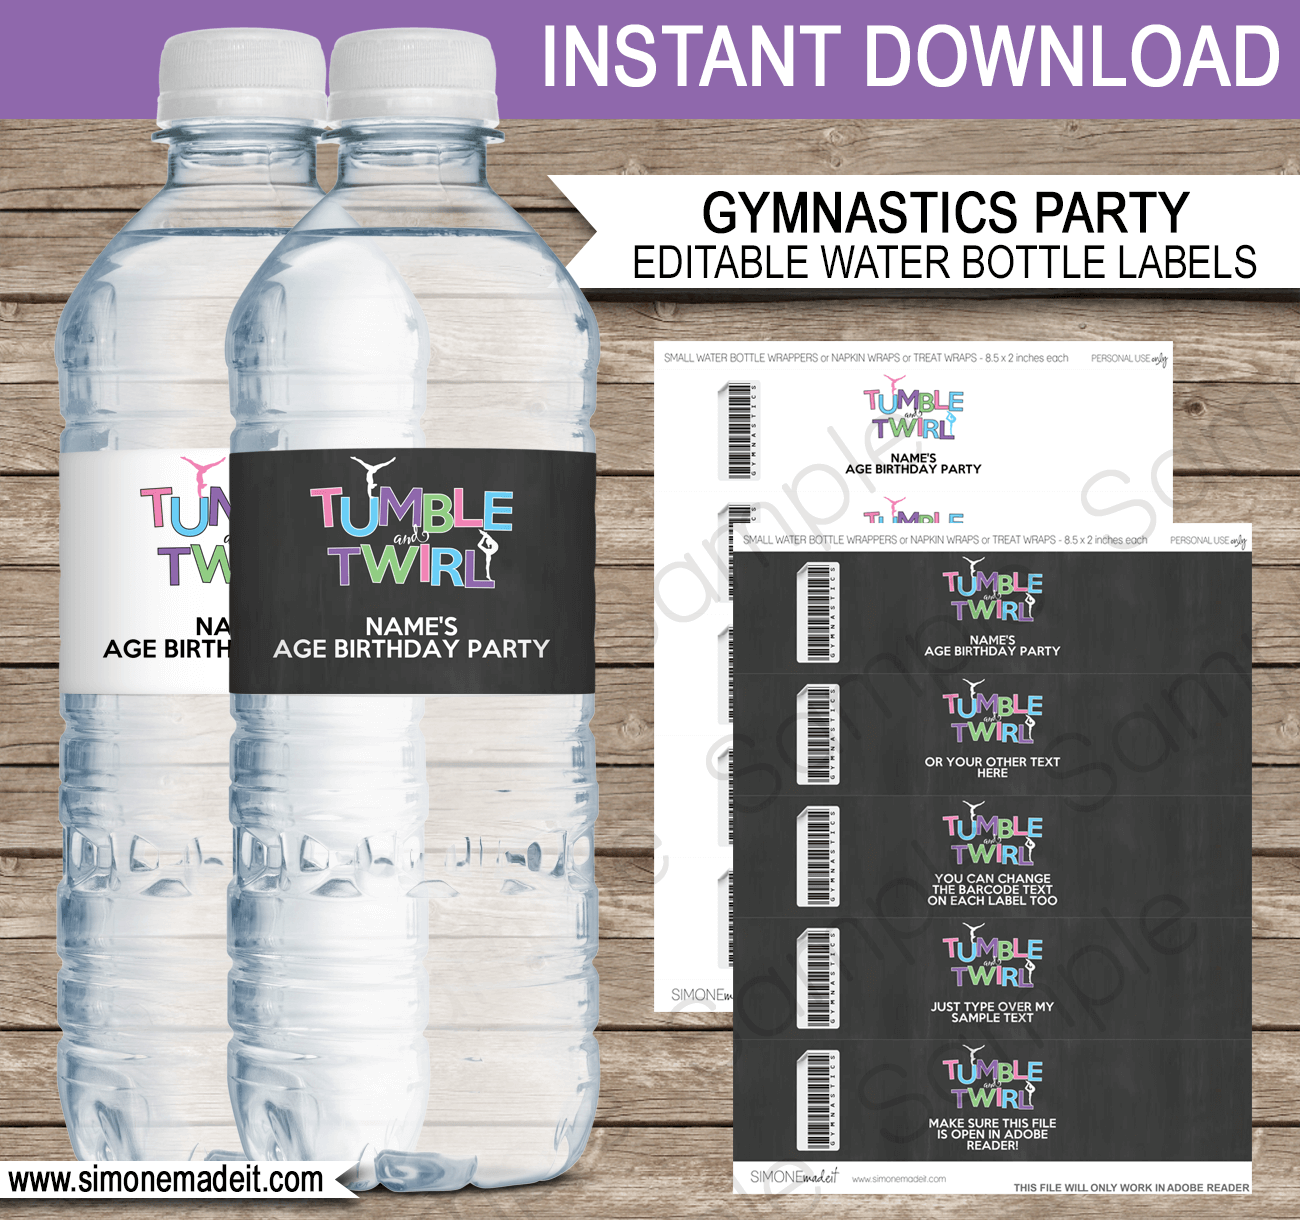 Gymnastics Party Water Bottle Labels | Birthday Party | Editable DIY Template | $3.00 INSTANT DOWNLOAD via SIMONEmadeit.com